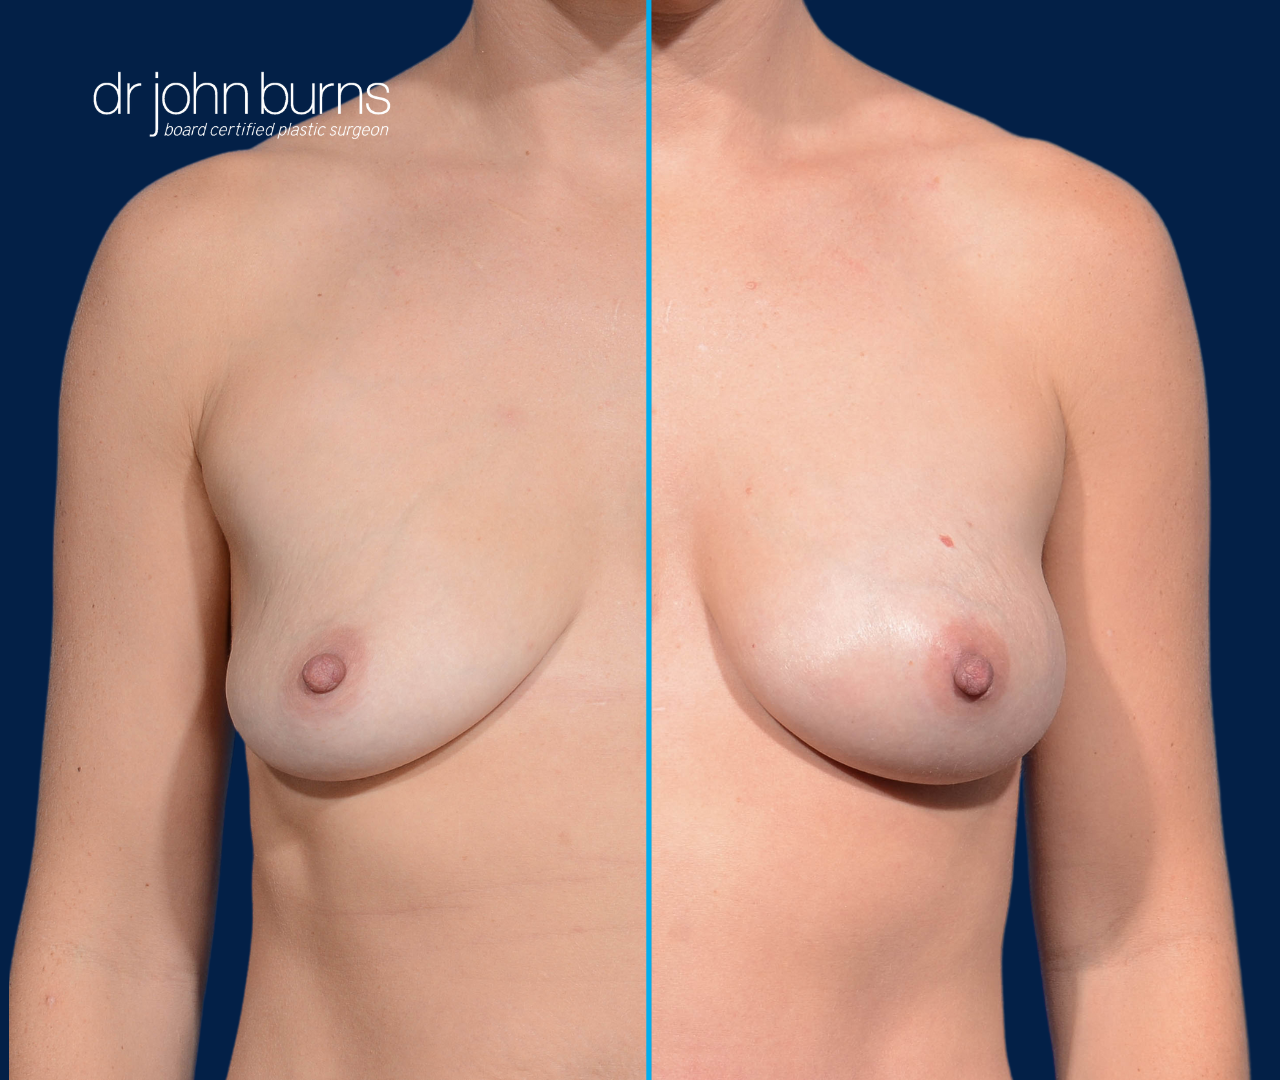 case 8- split screen before & after fat transfer to breast by top plastic surgeon, Dr. John Burns